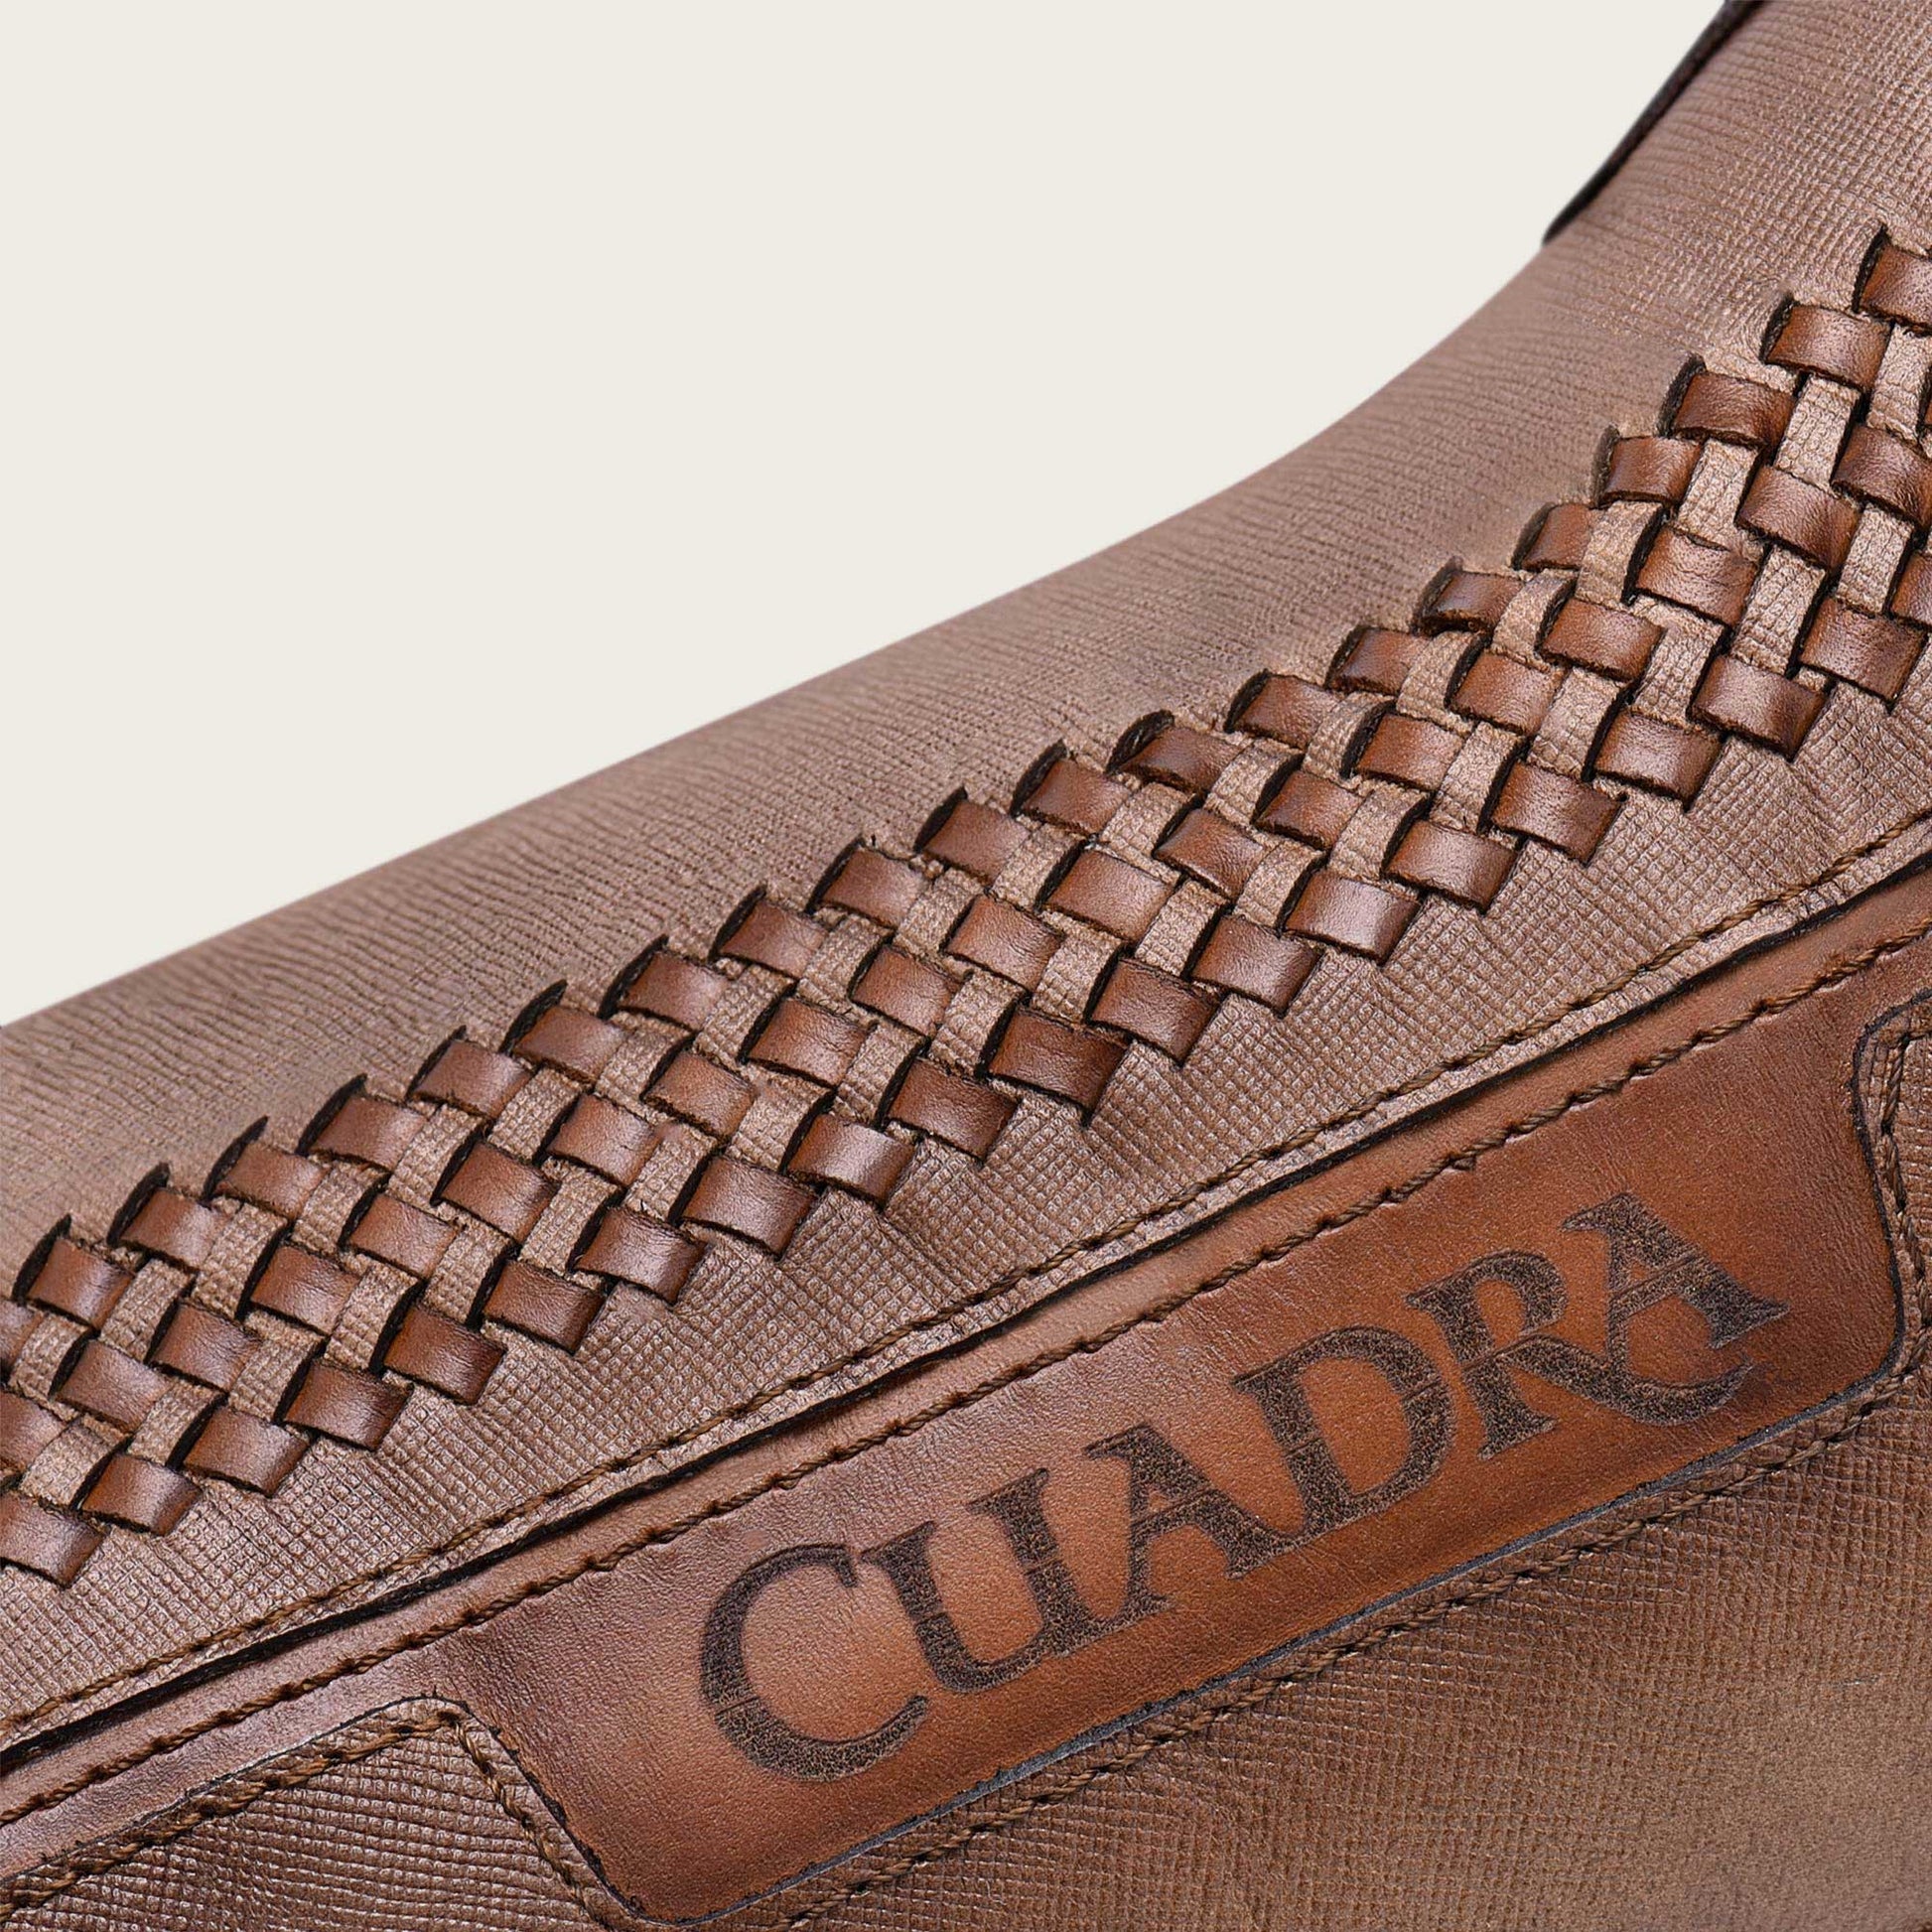 A skillfully crafted boot made of honey-colored leather with intricate handwoven details